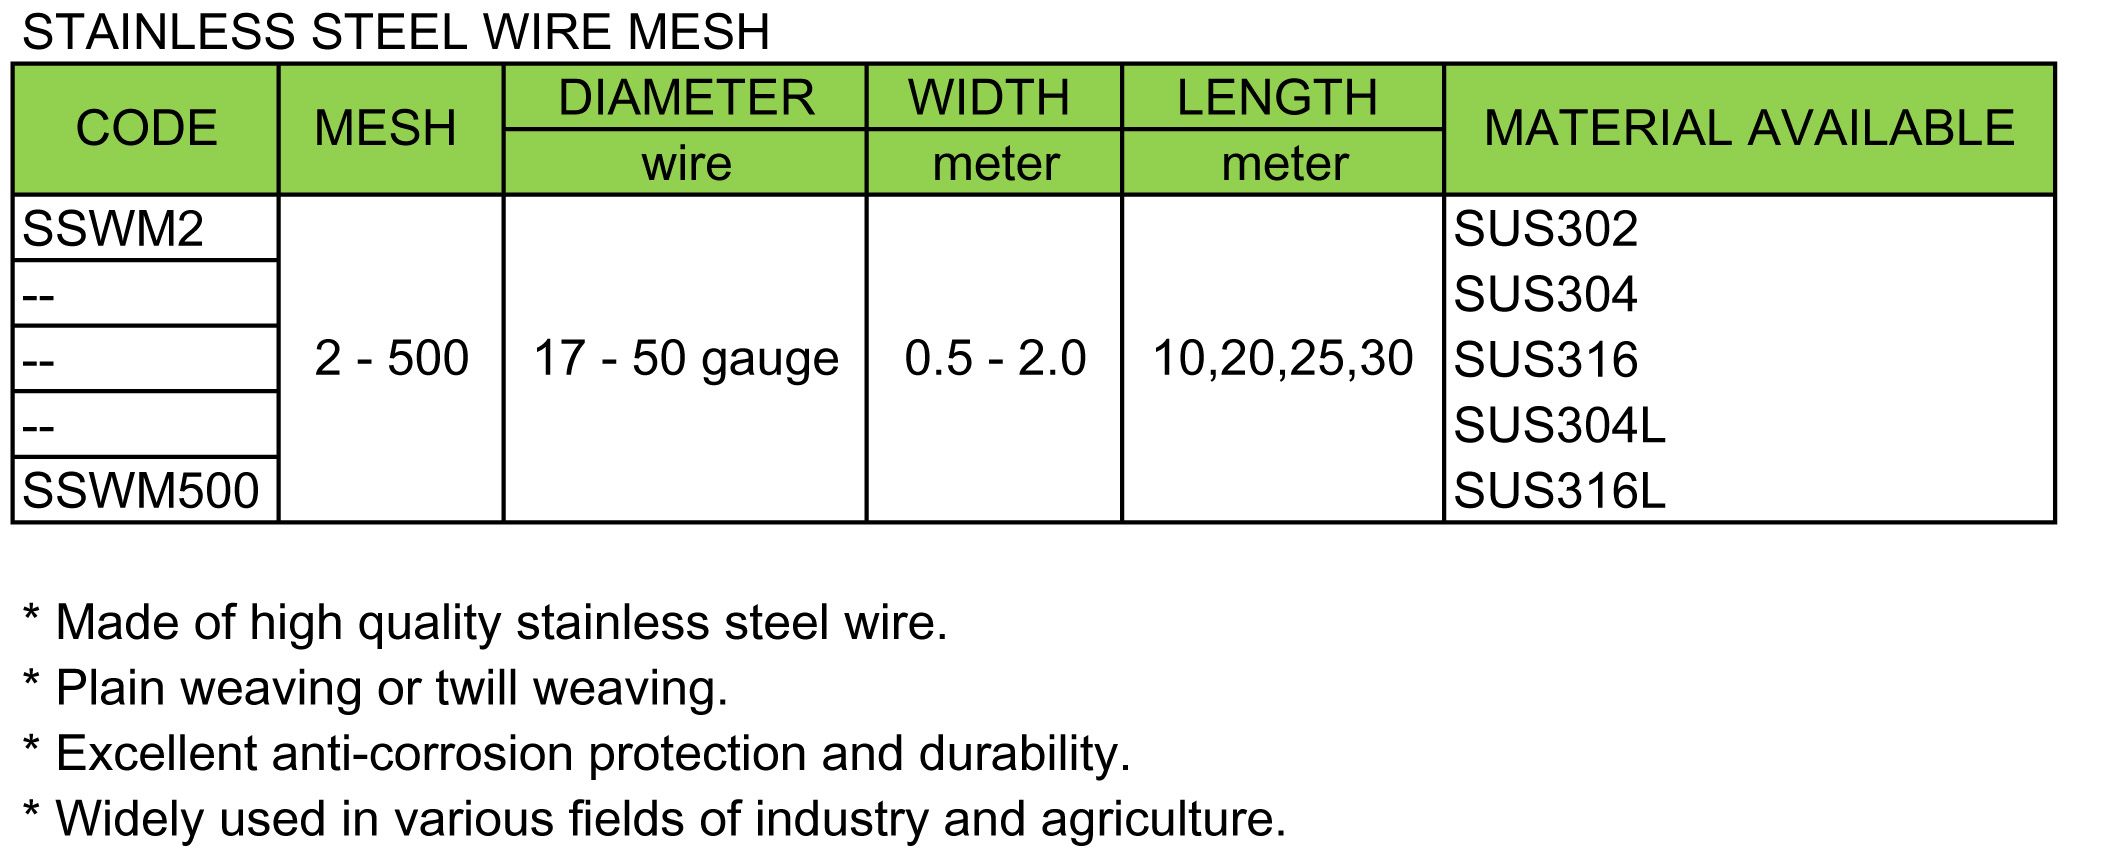 Stainless Steel Wire Mesh(图1)